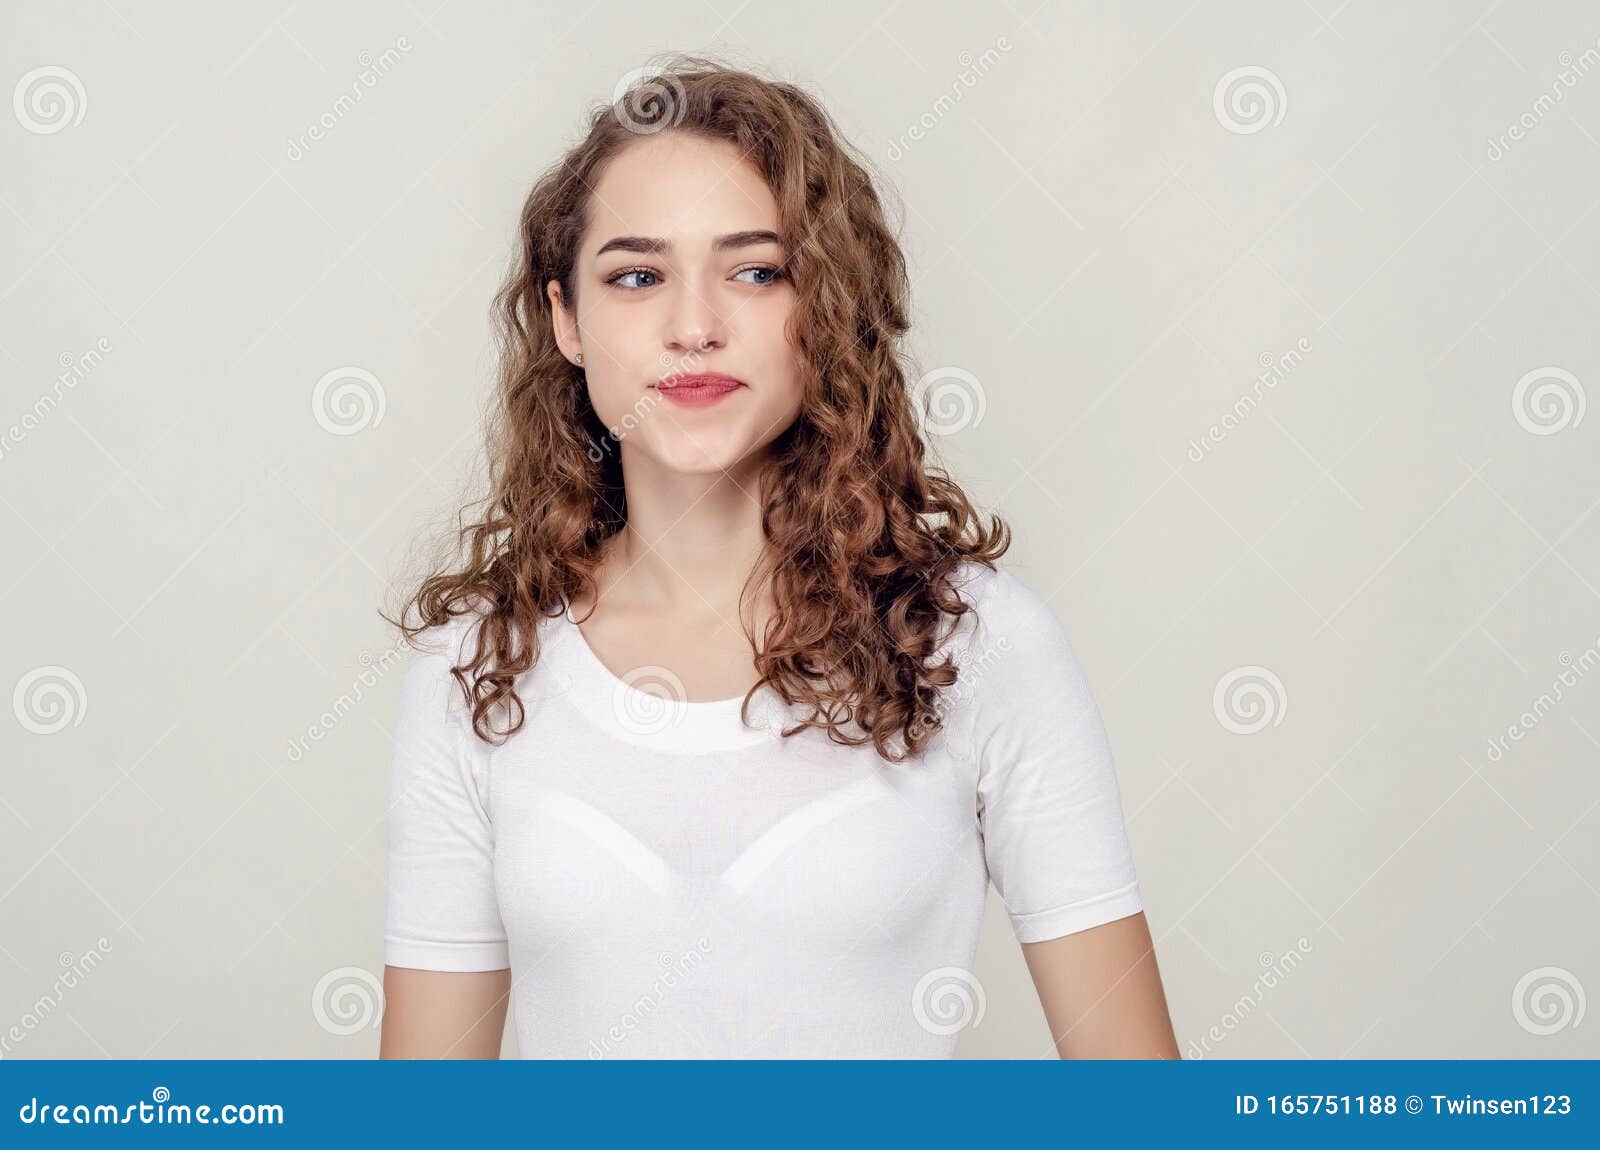 Beautiful Ironic Girl Up To the Waist on a Beige Background Looks Away ...